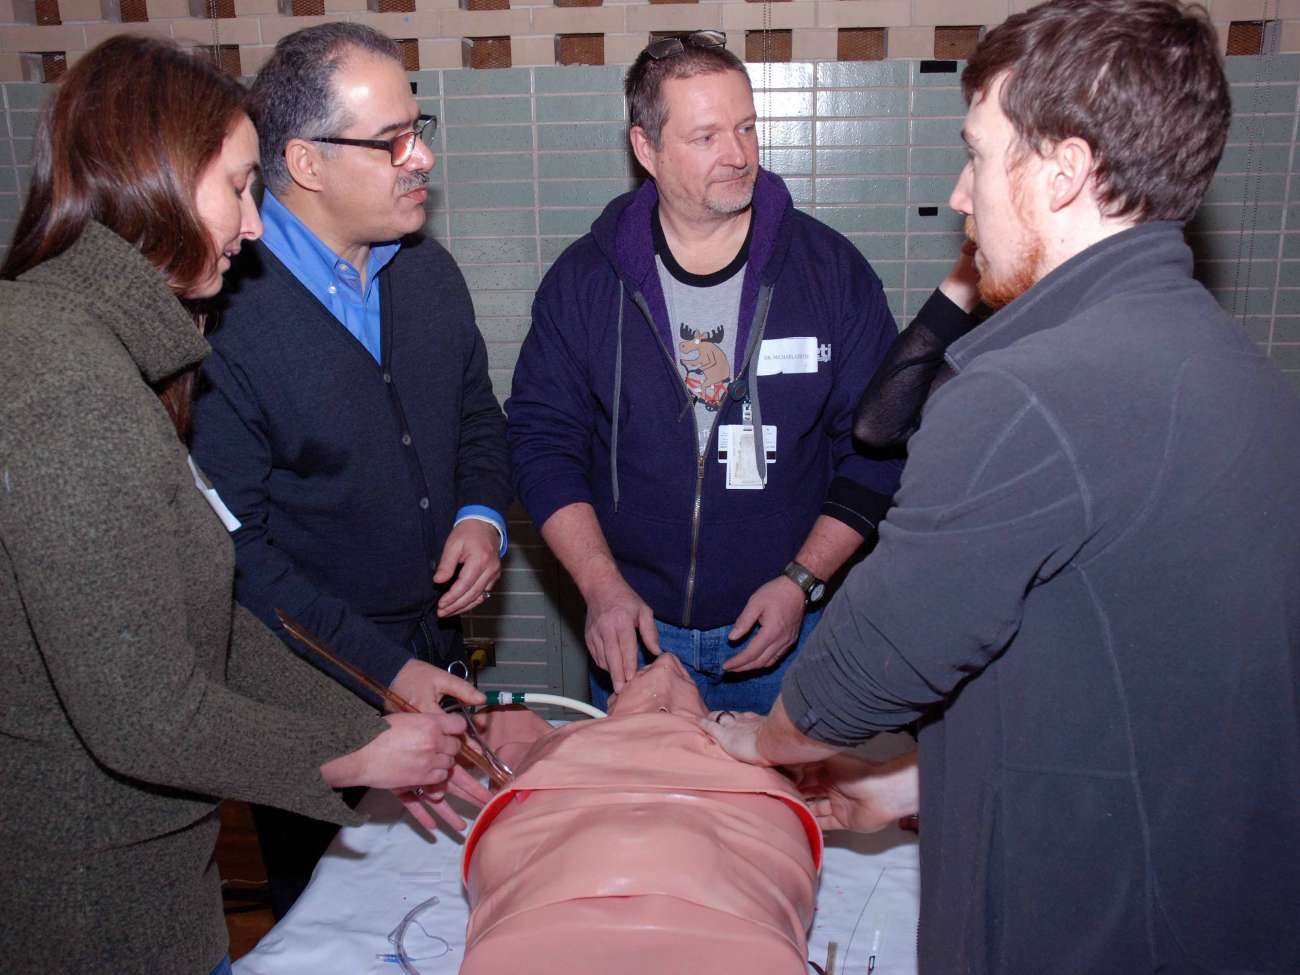 Emergency care providers in a practice session for advanced trauma life support